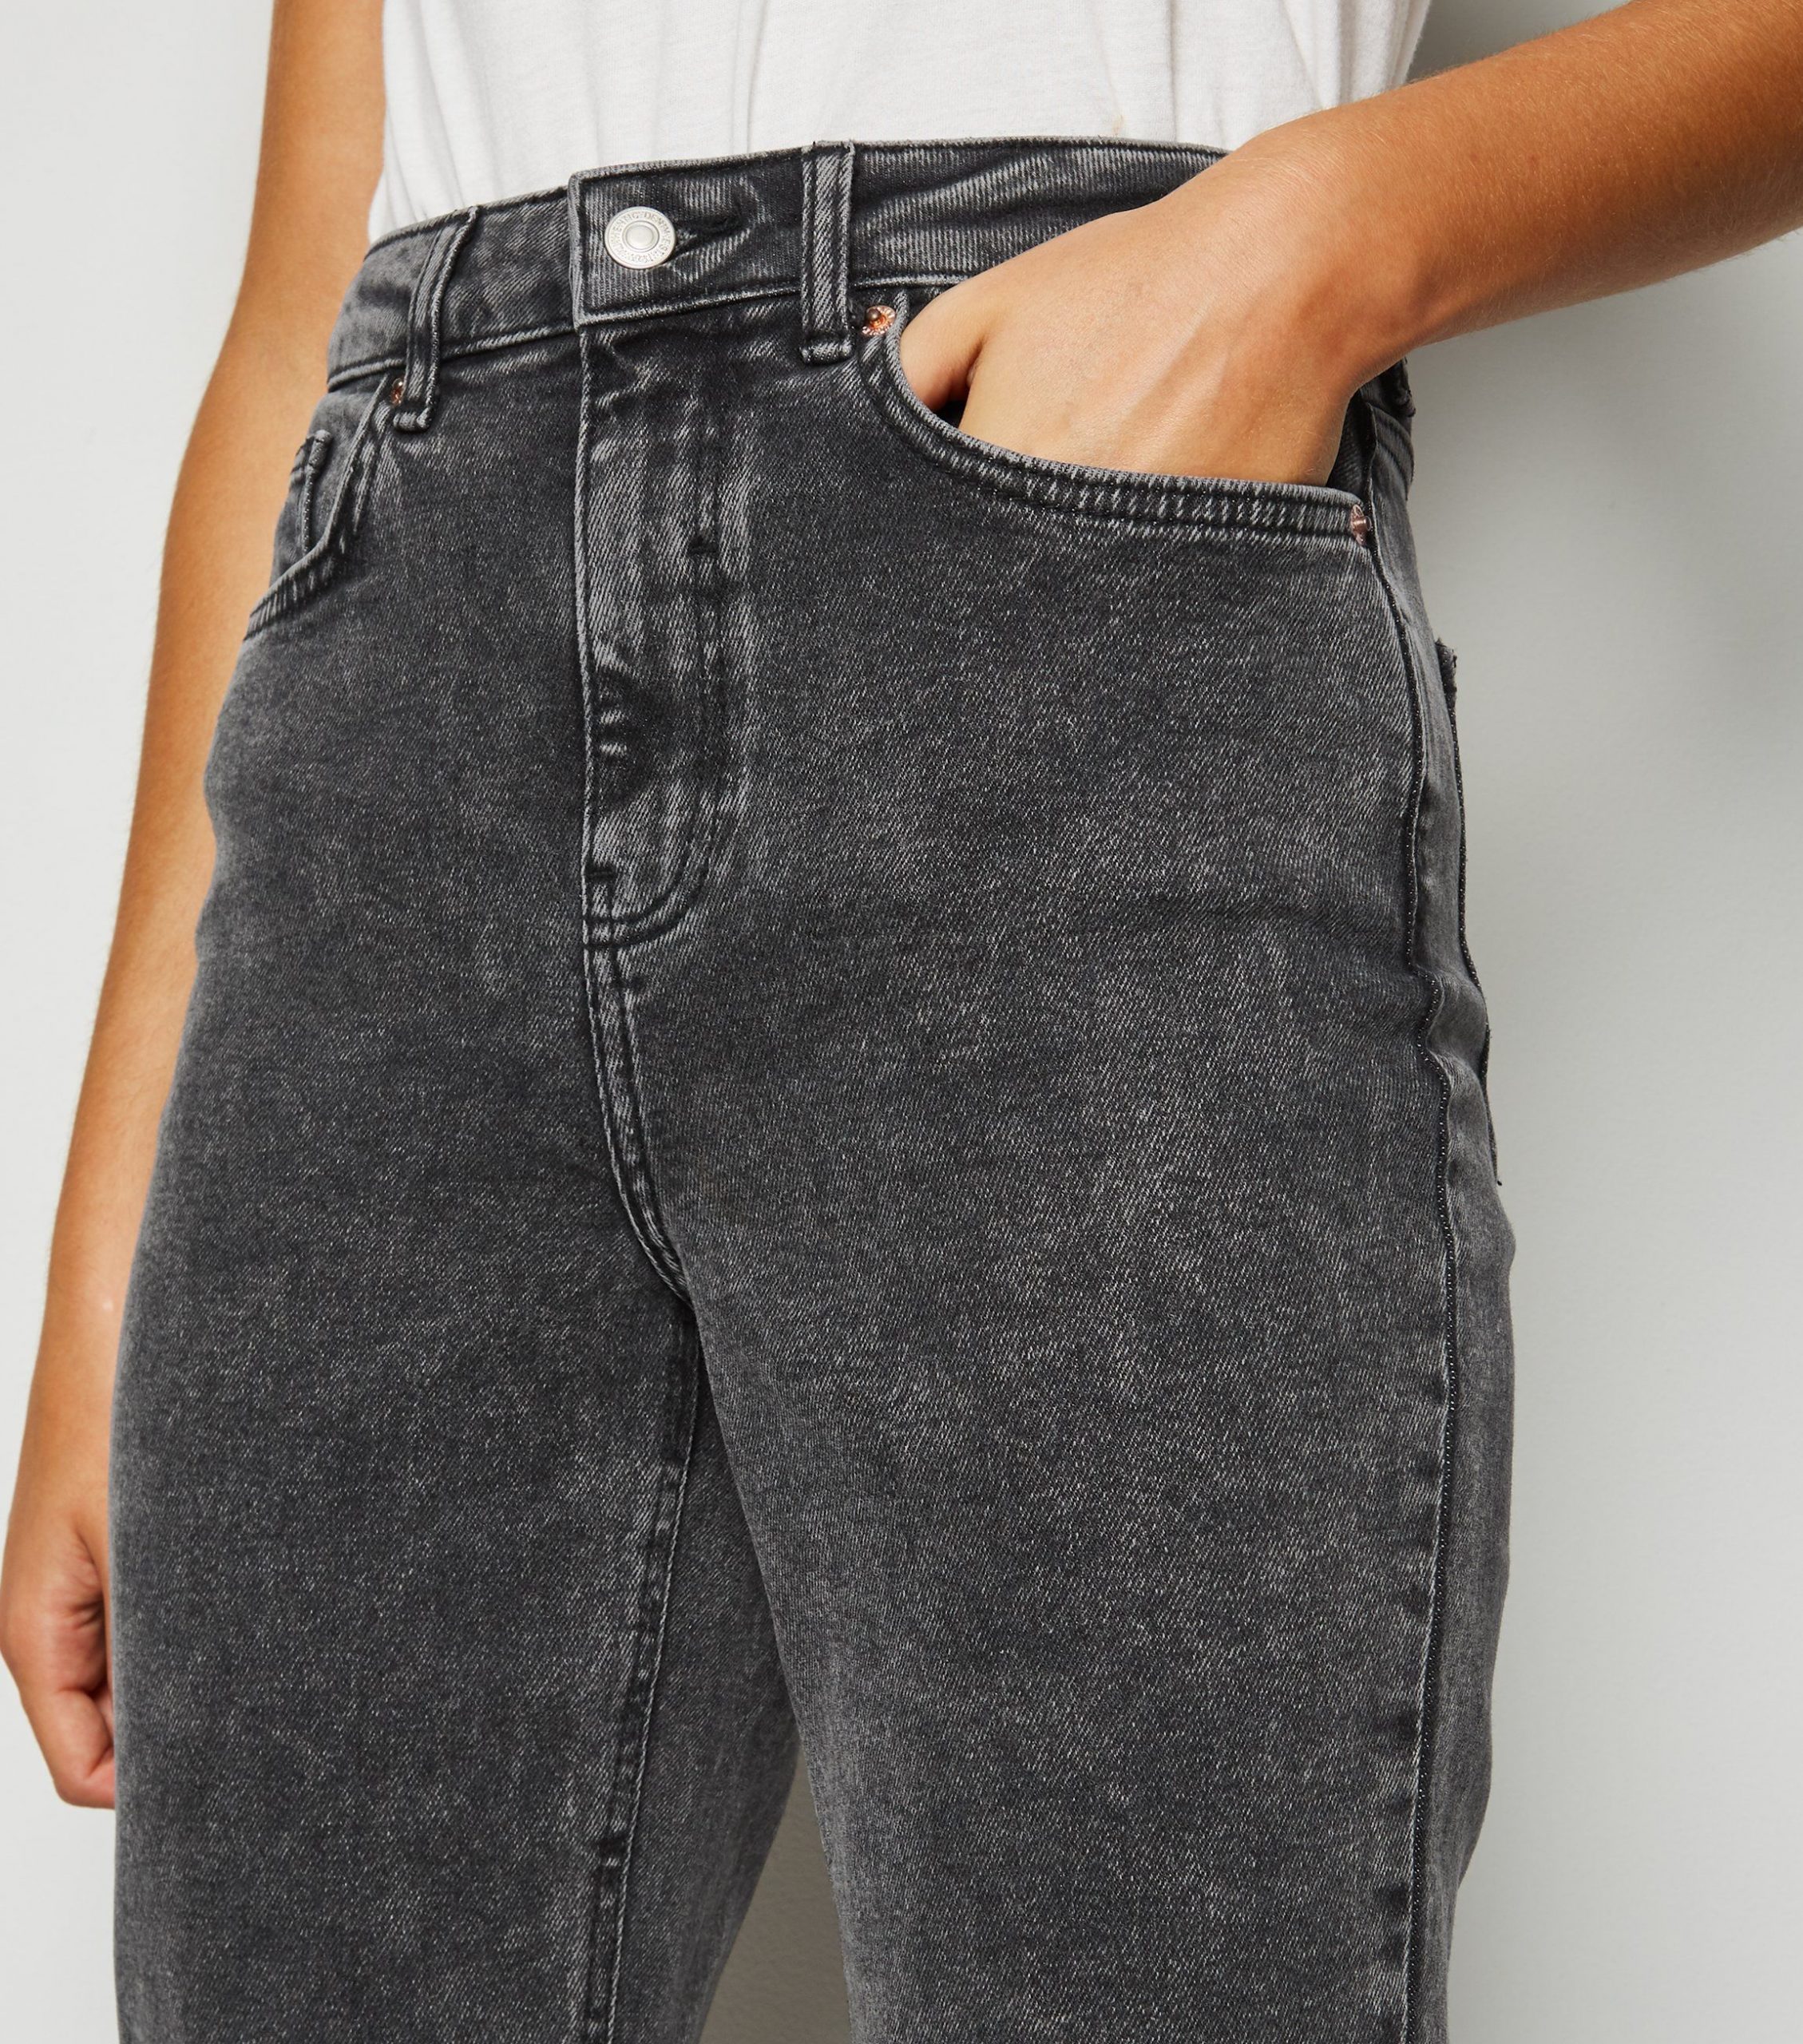 15 Edgy Mom Jeans Outfits To Steal Right Now - Styleoholic